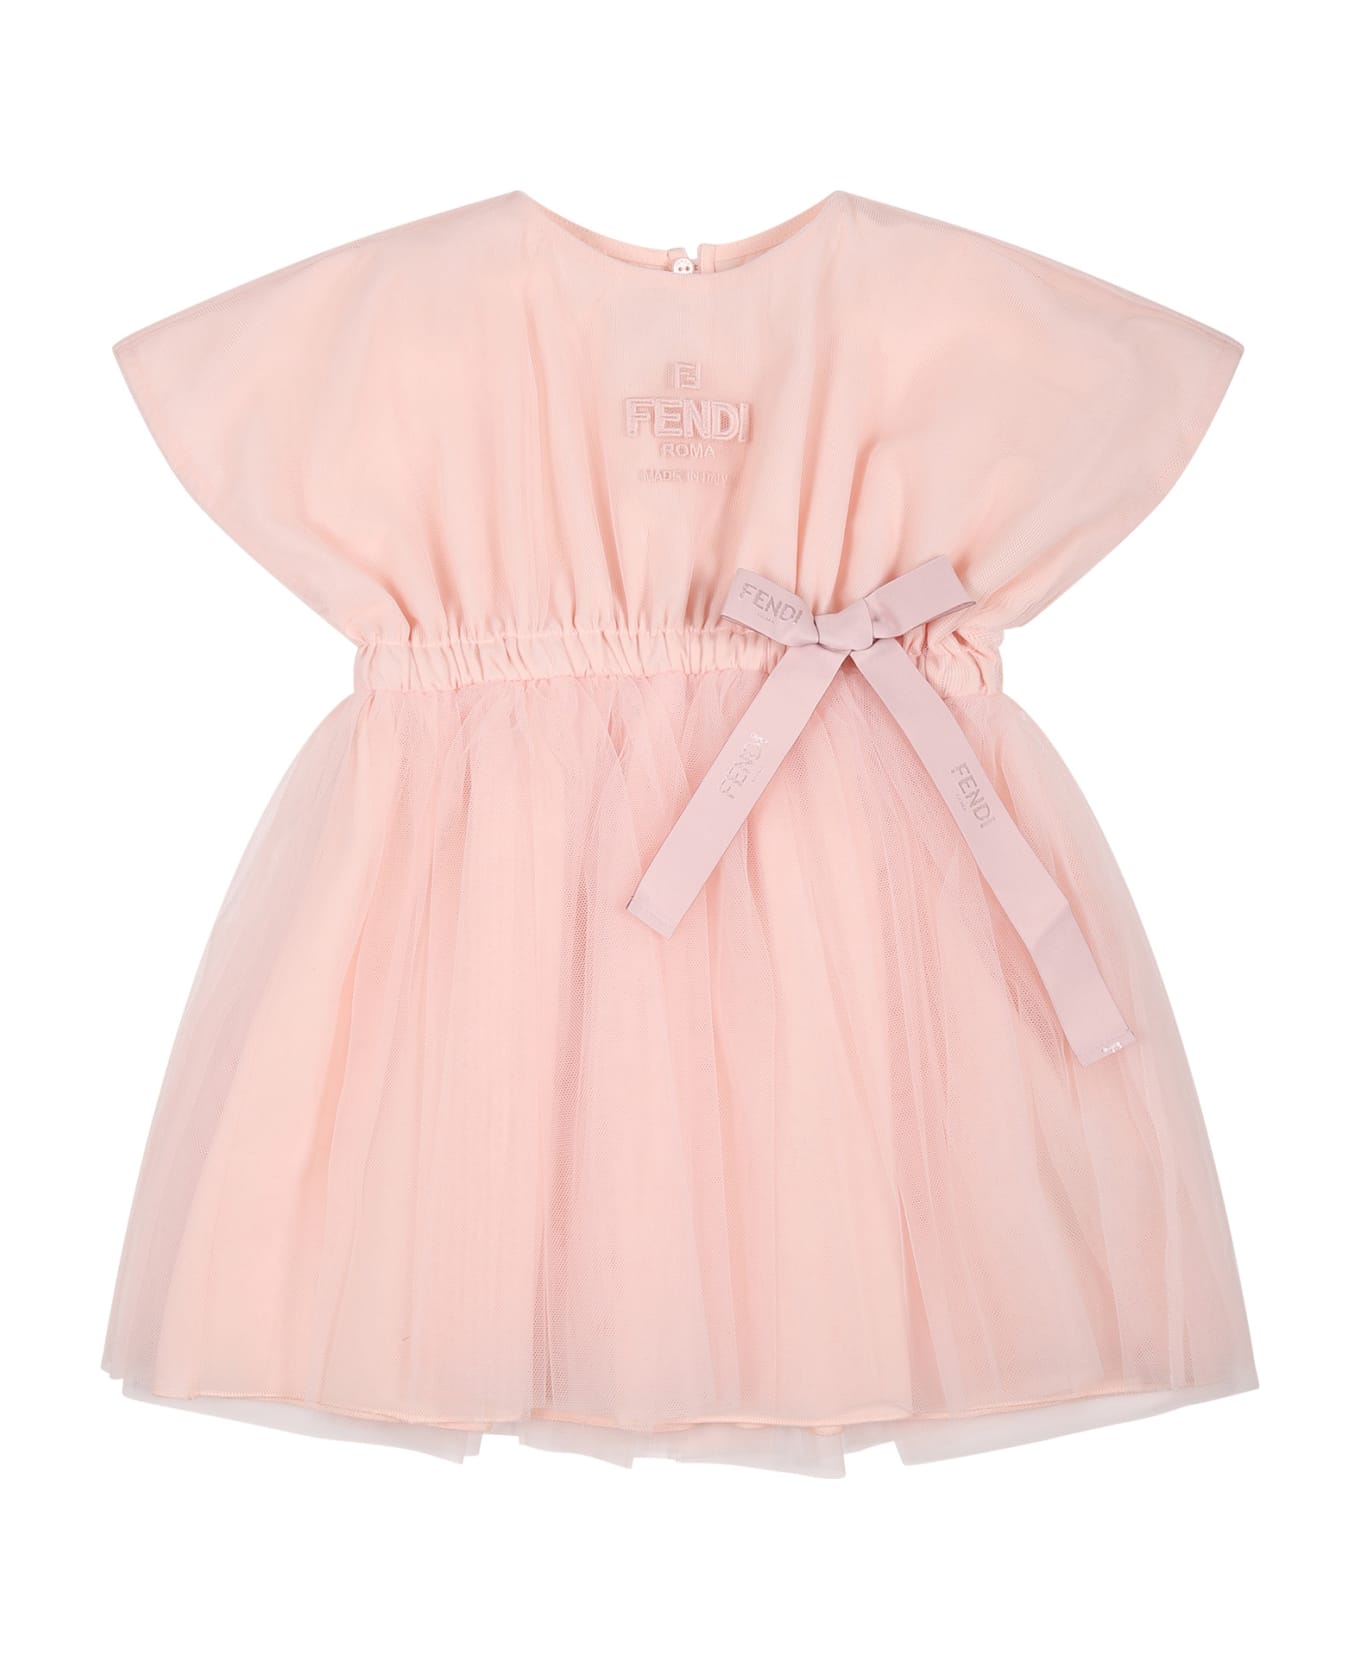 Fendi Pink Dress For Baby Girl With Logo - Pink ウェア